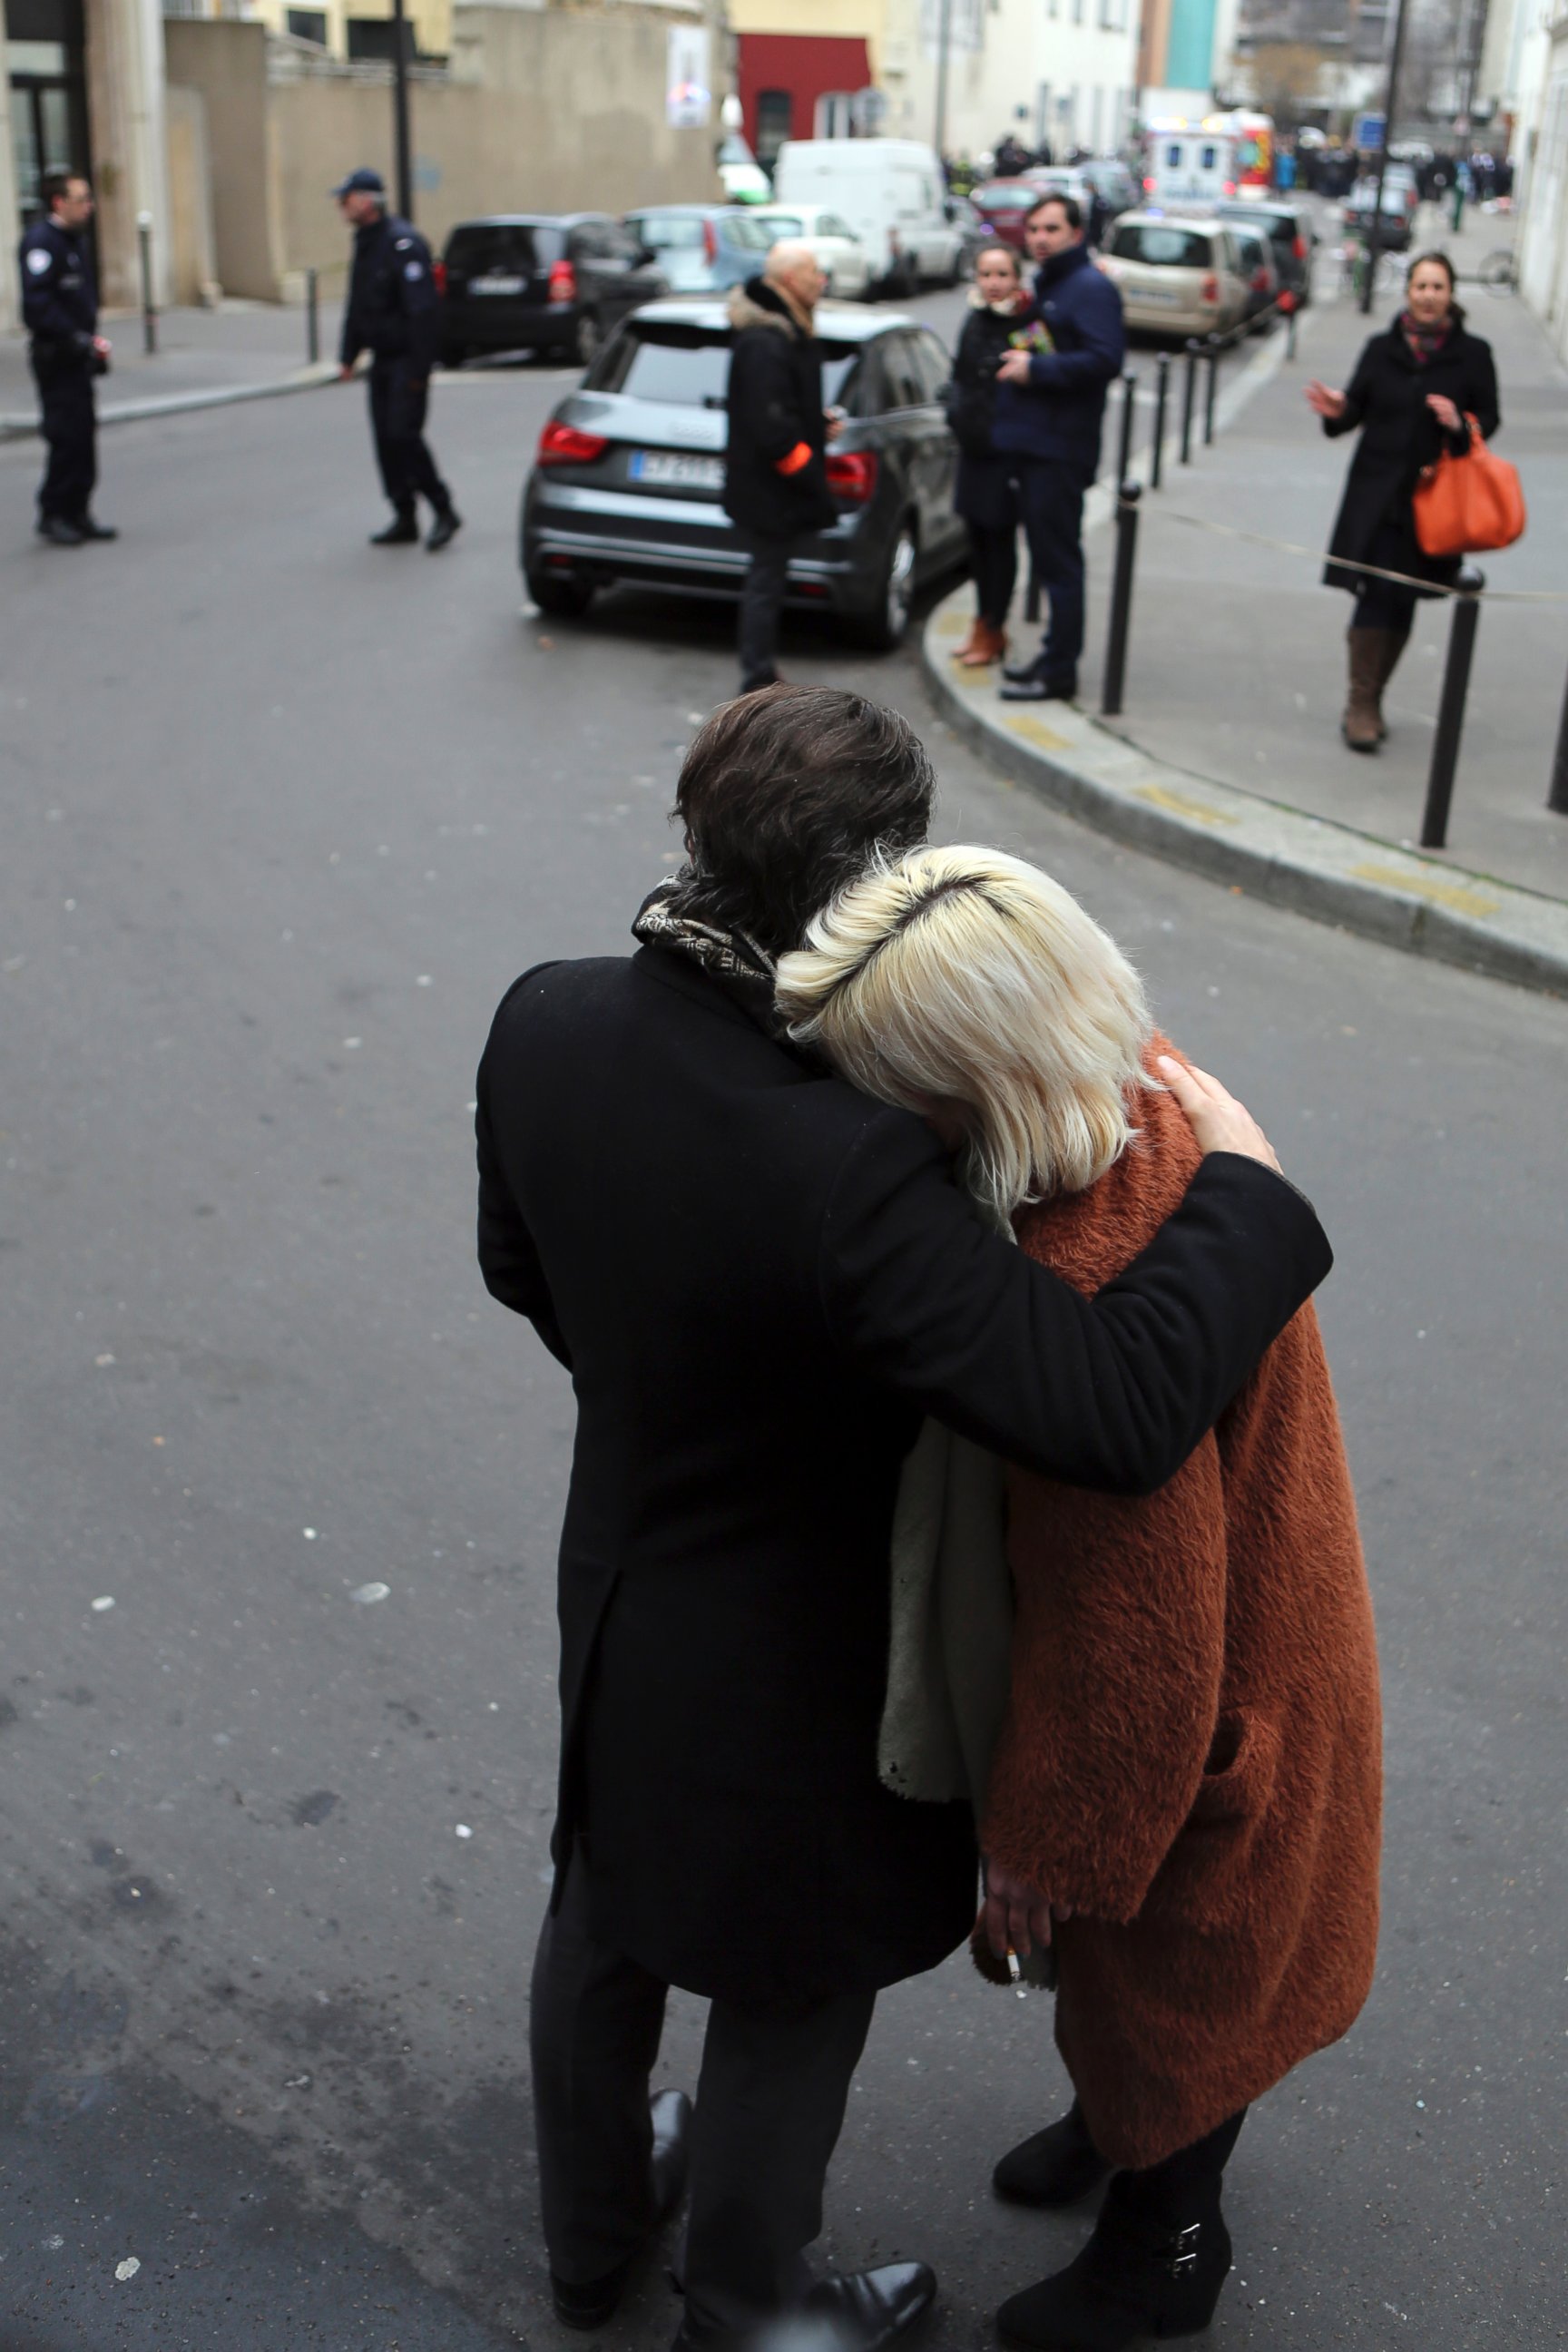 PHOTO: People stand outside the French satirical newspaper Charlie Hebdo's office after a shooting, in Paris, Jan. 7, 2015. 